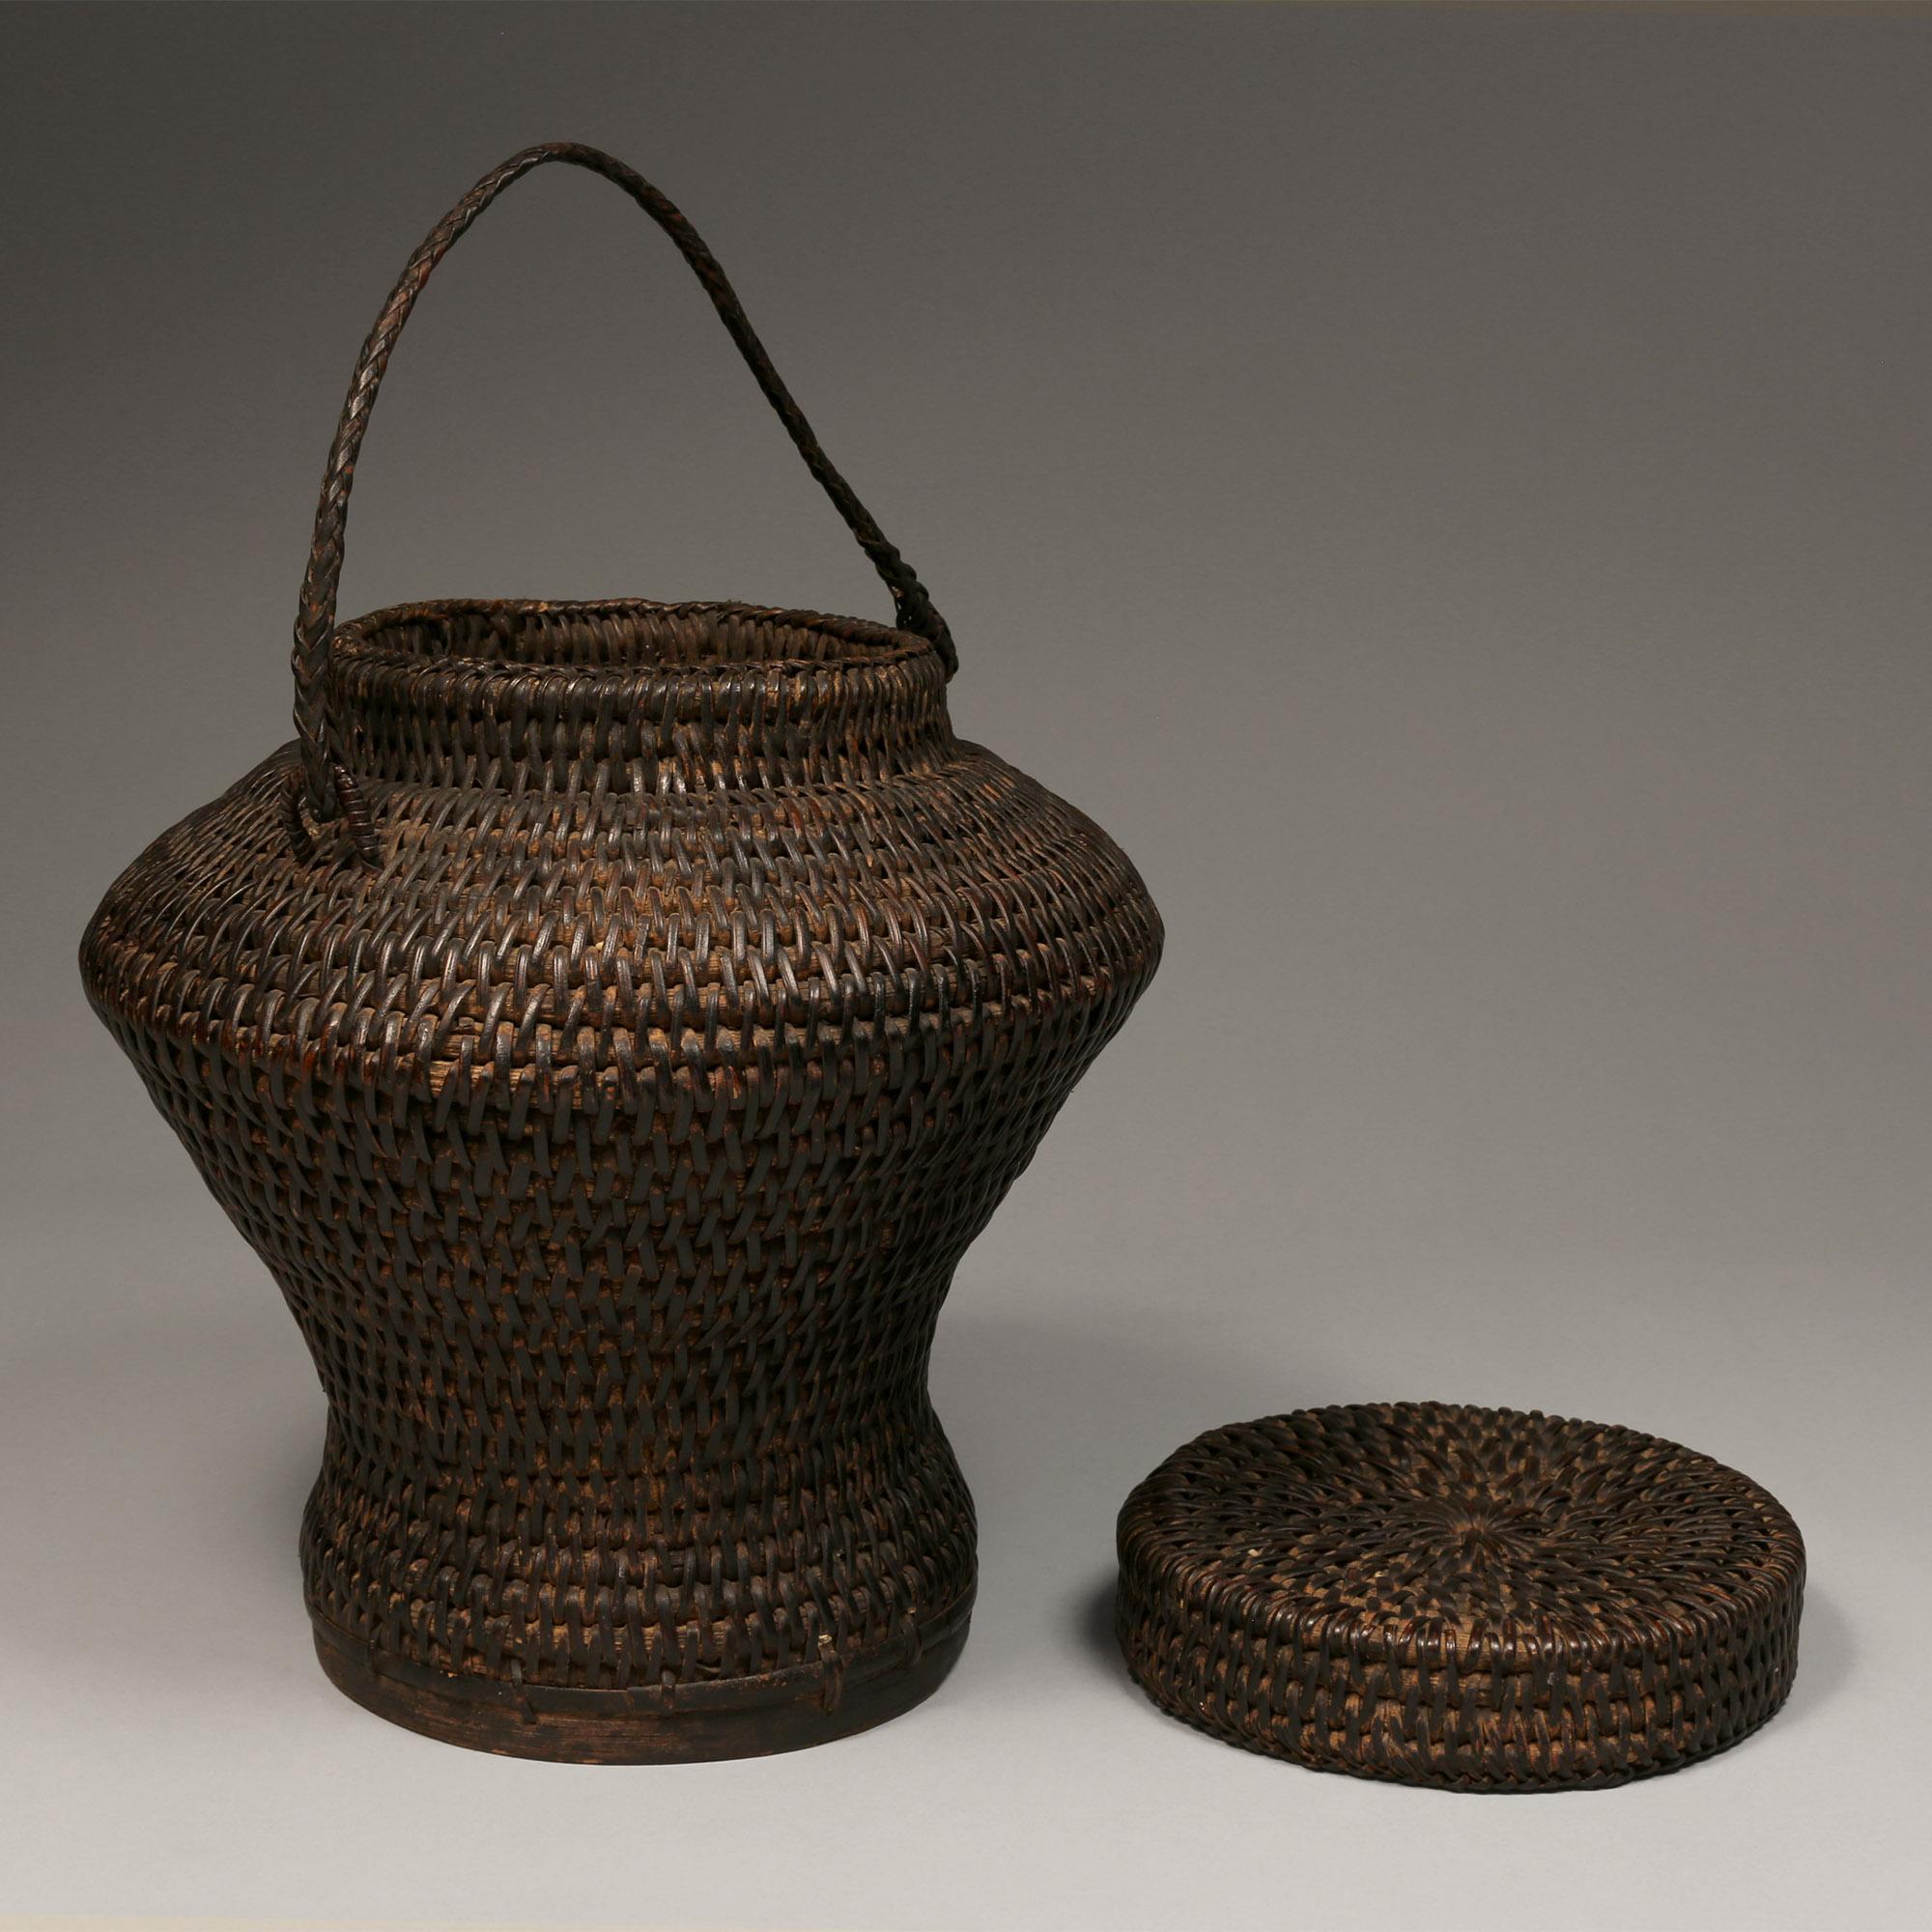 Old Jar-shaped rice storage basket (Ulbung), Philippines, early to mid-20th Century
This basket comes from Ifugao, Philippines. Made by hand from bamboo coil weave construction and rattan.

Conditions: The basket is in very good condition with